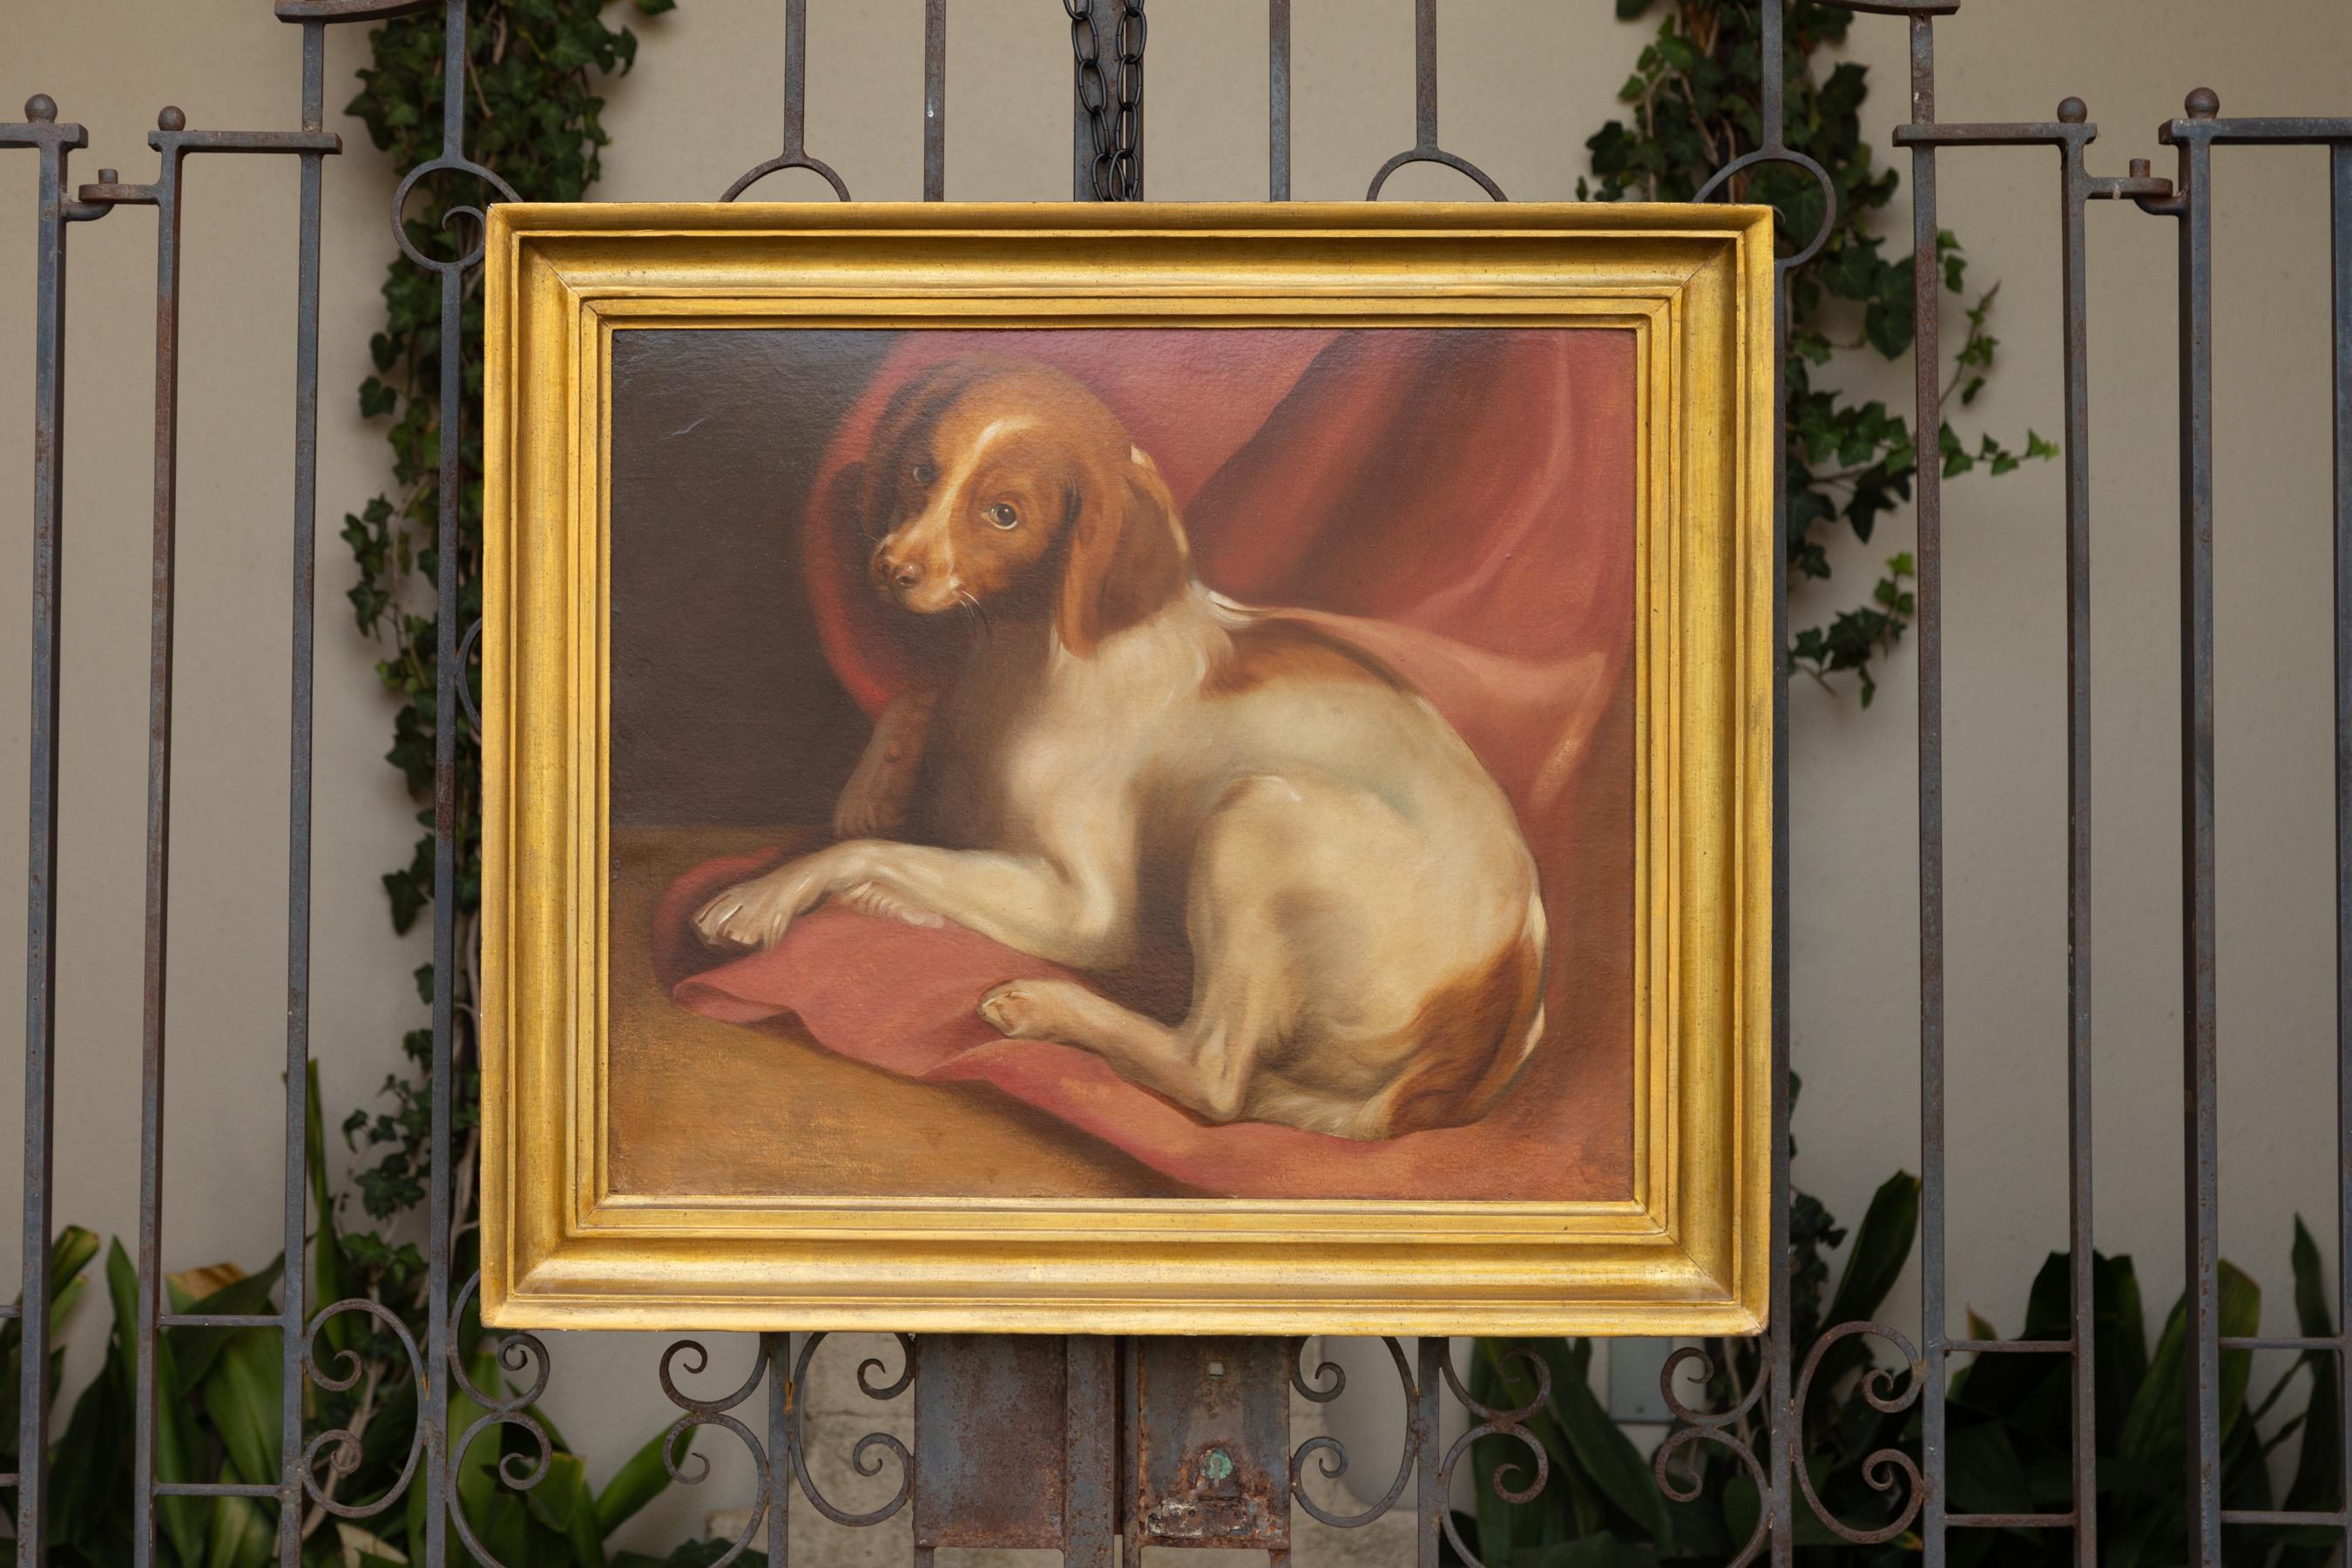 American 1890s Framed Oil on Board Painting Depicting a Dog Lying on a Red Drape In Good Condition For Sale In Atlanta, GA